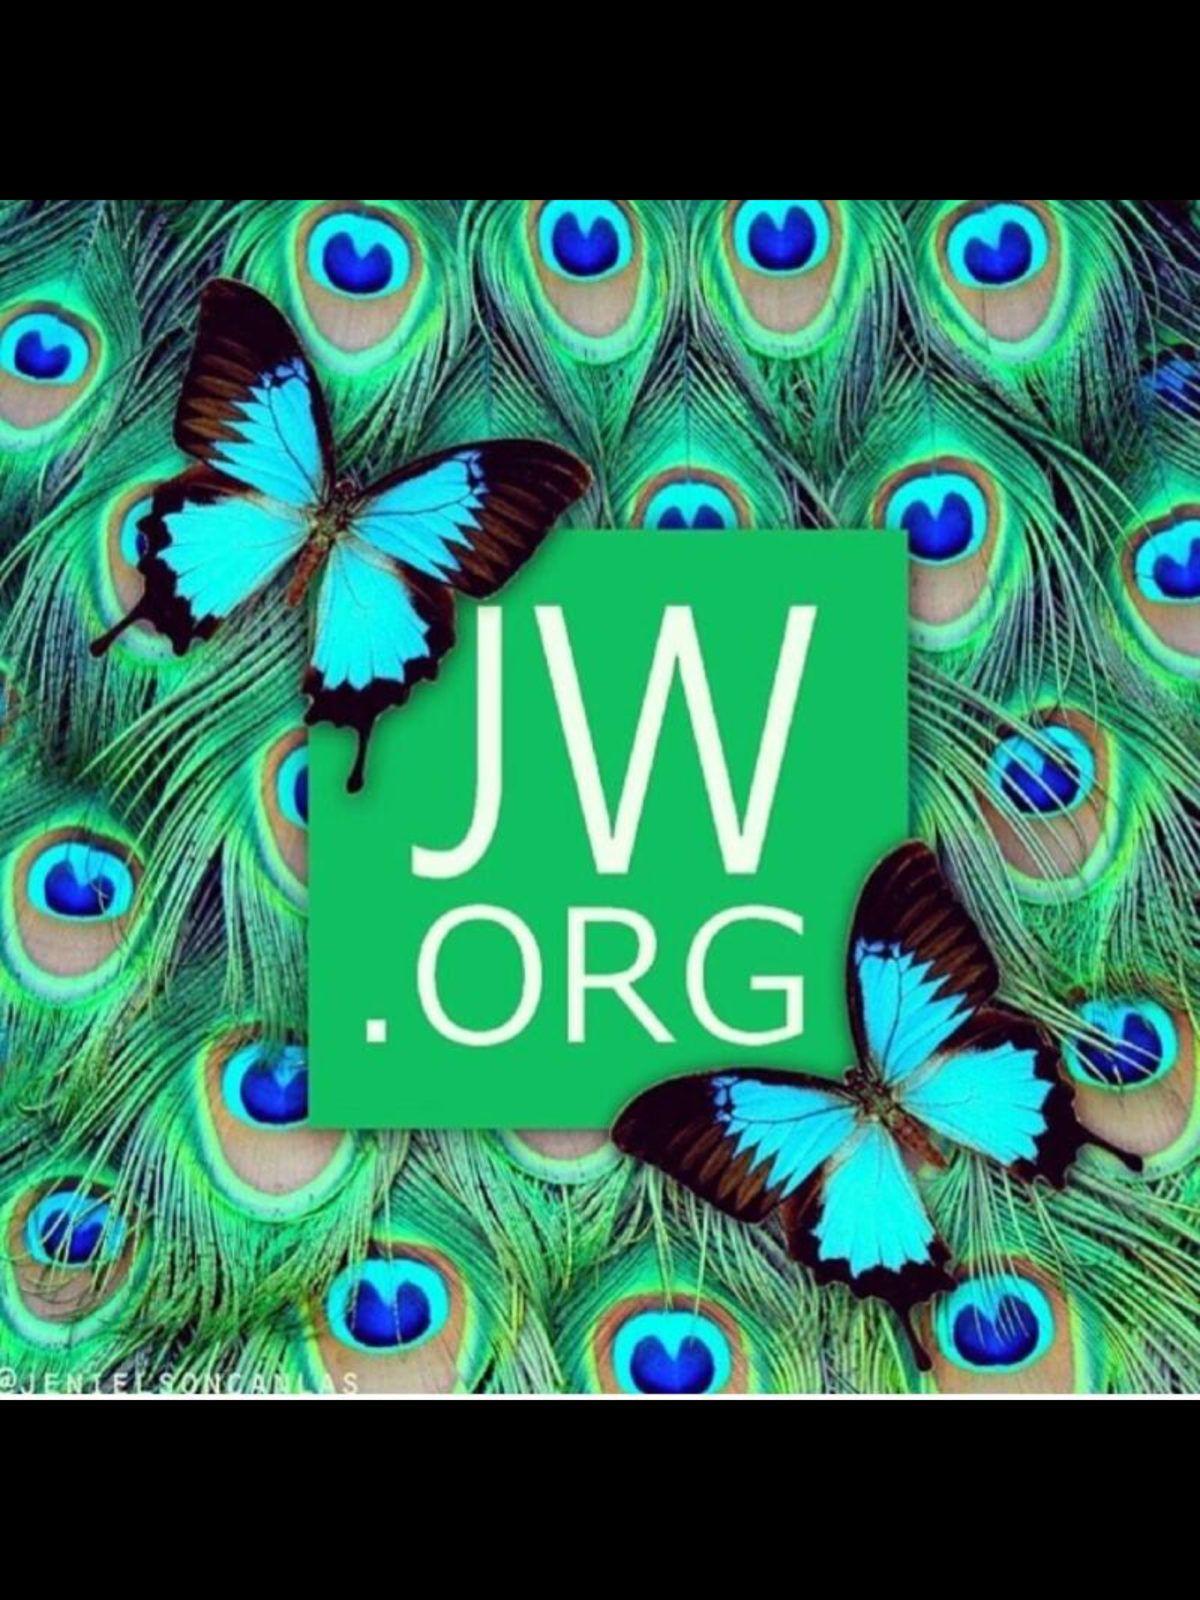 Jw Org Wallpapers Top Free Jw Org Backgrounds Wallpaperaccess